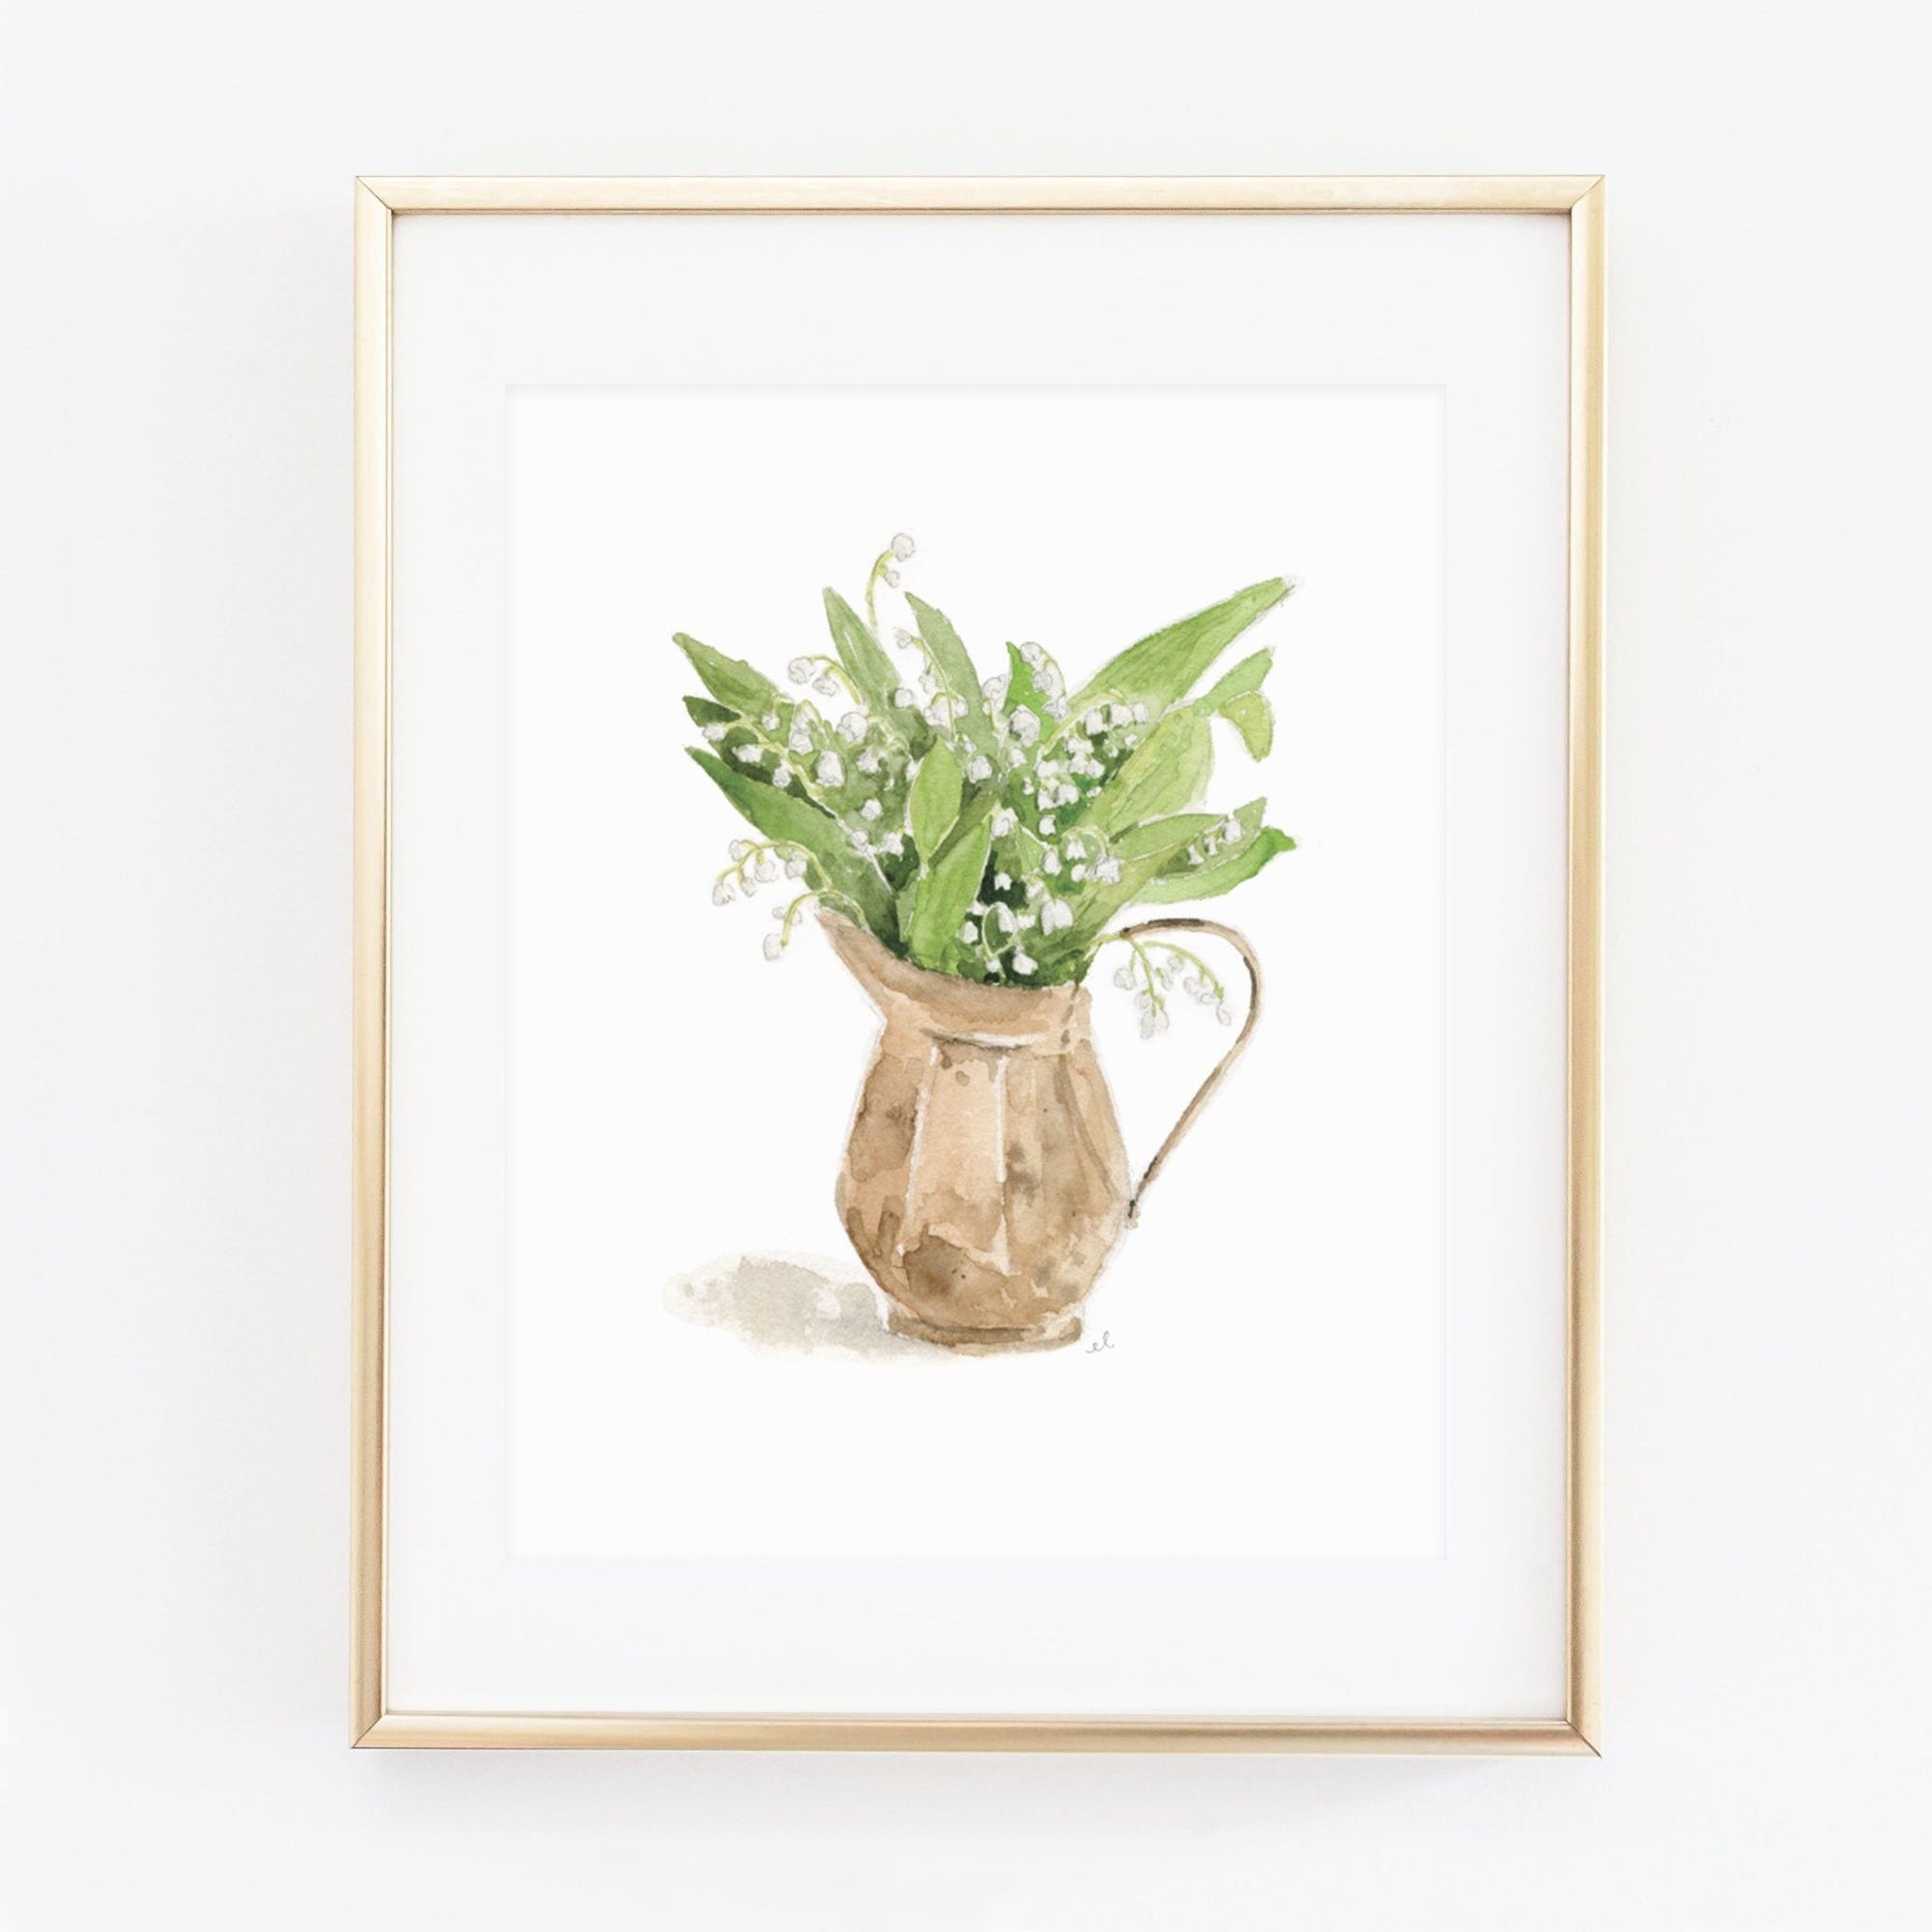 lily of the valley bouquet art print - emily lex studio